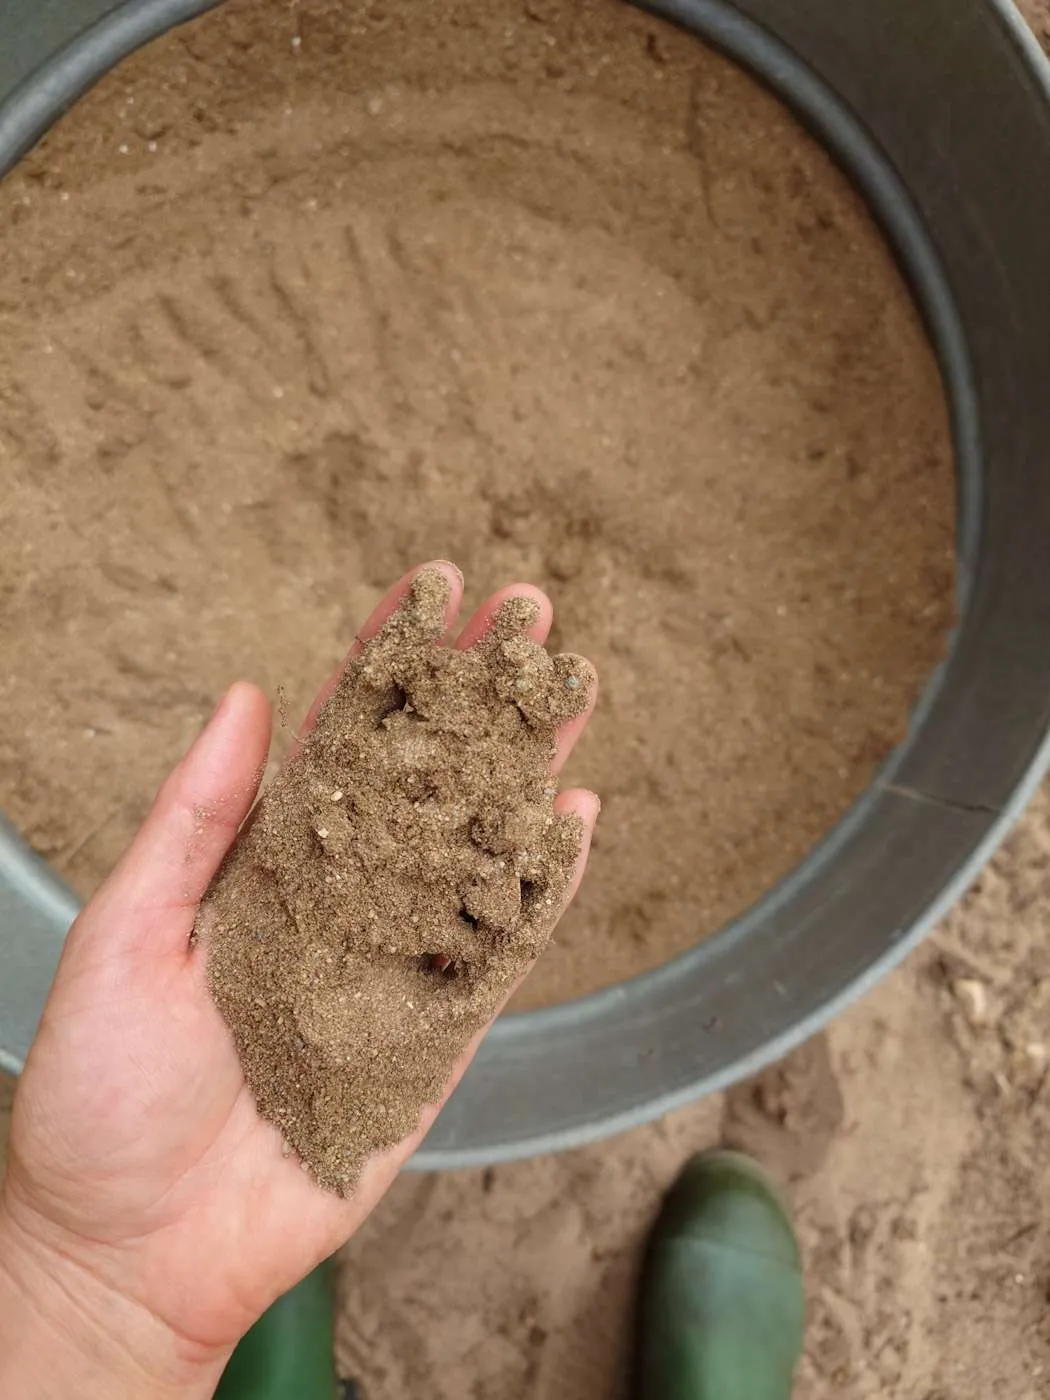 A hand is holding a handful of dirt and sand to illustrate the texture and makeup of the contents in the metal tub that is visible below. 